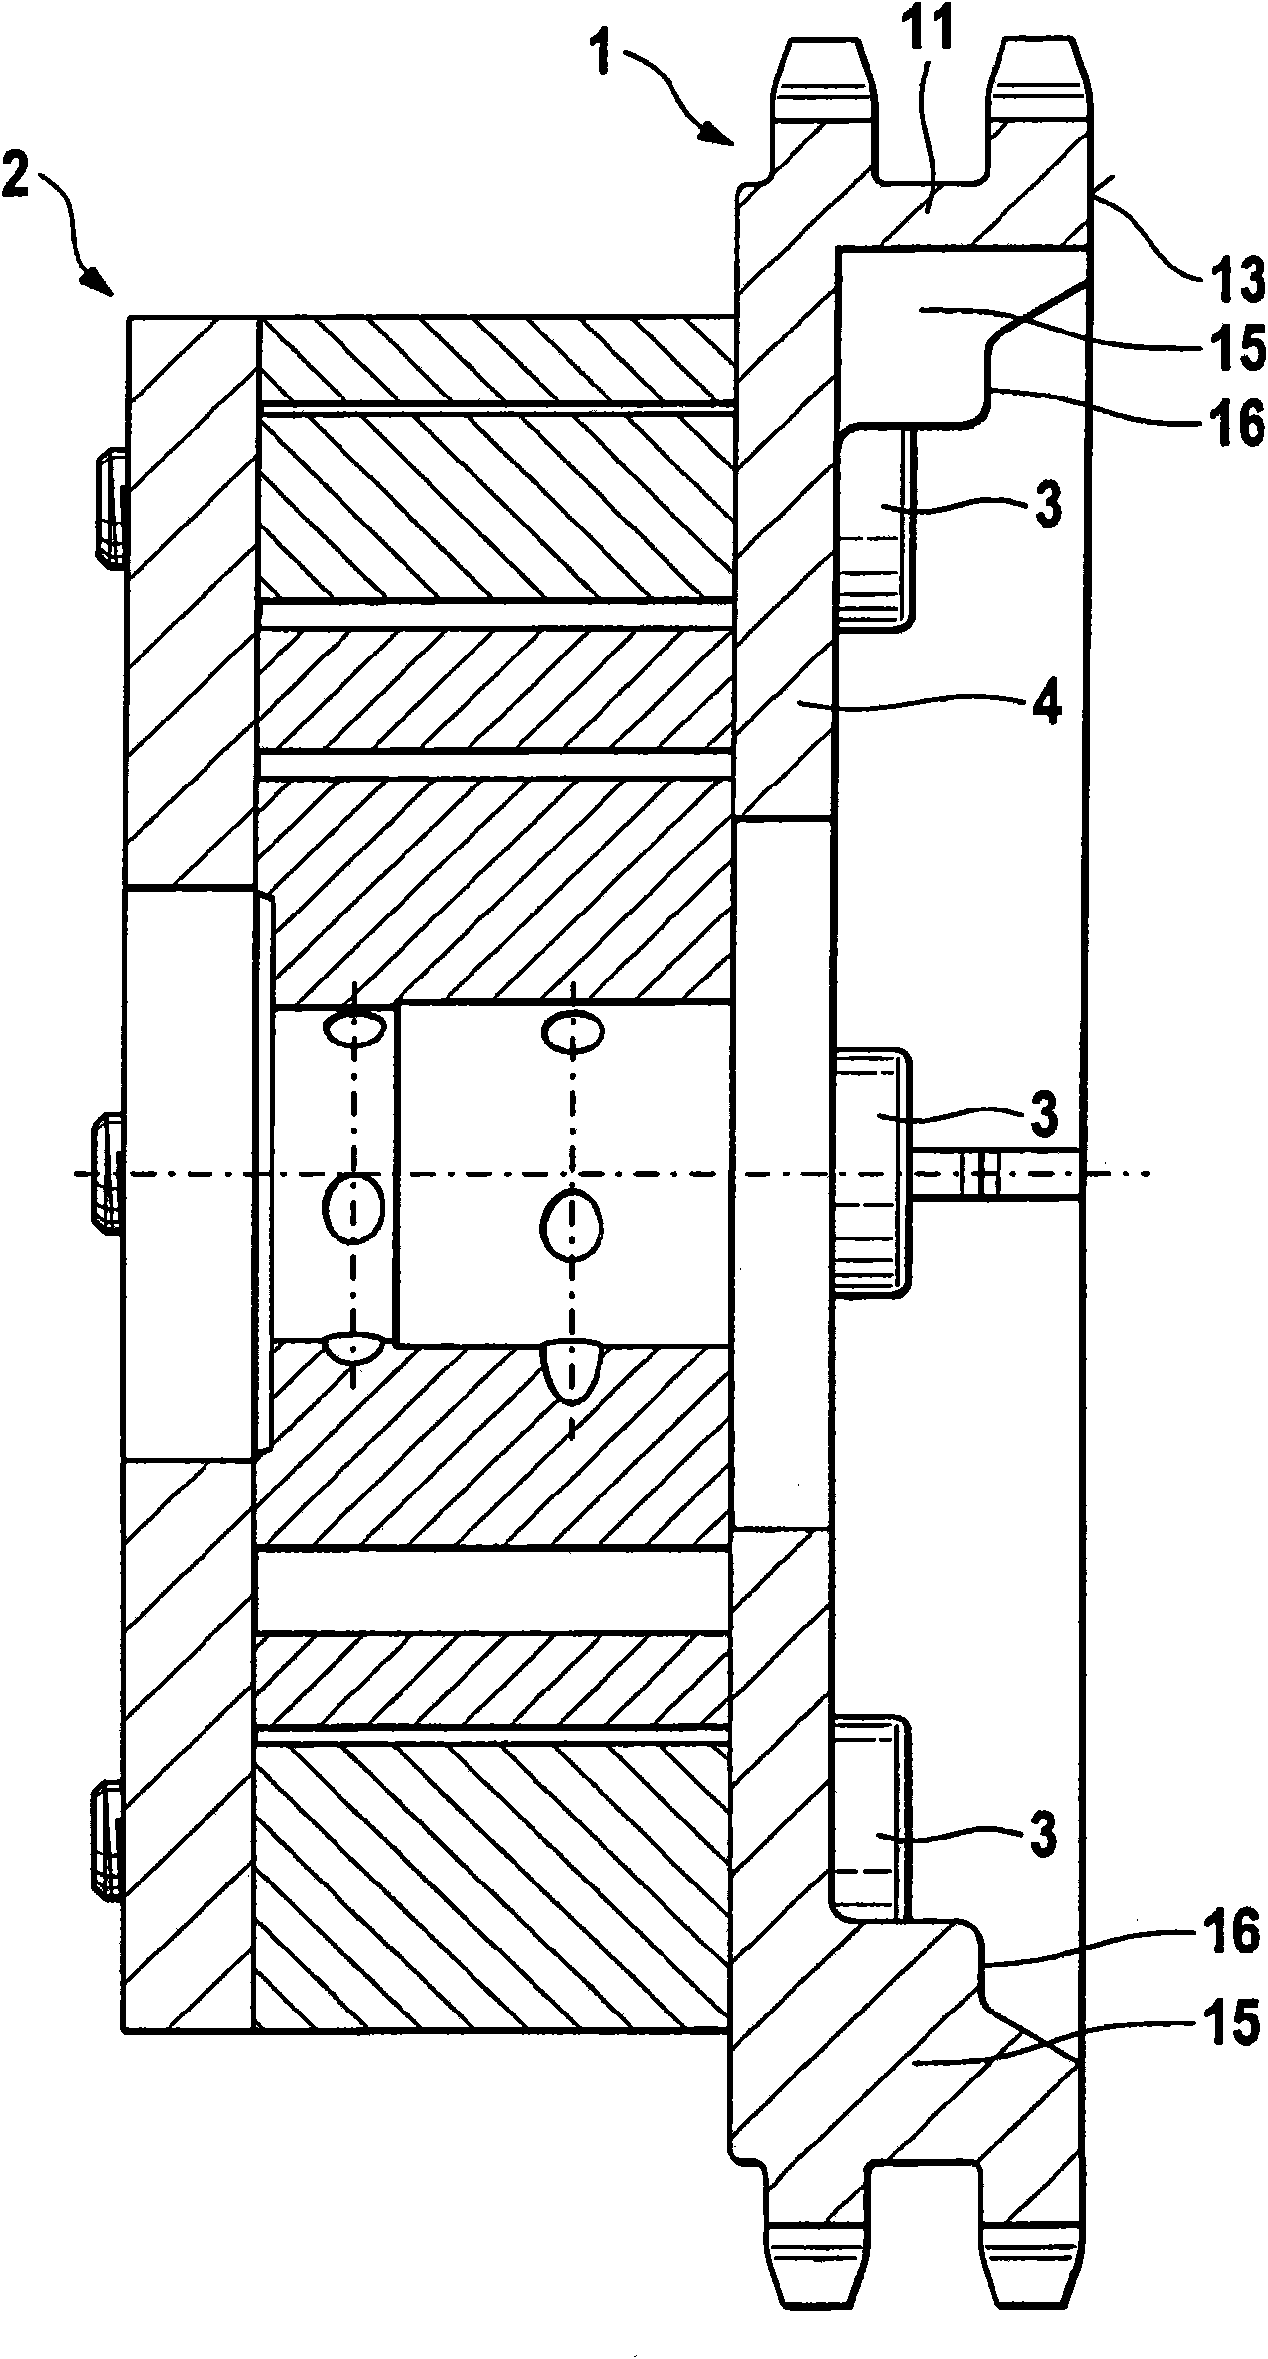 Modular construction camshaft adjuster with a chain or belt wheel